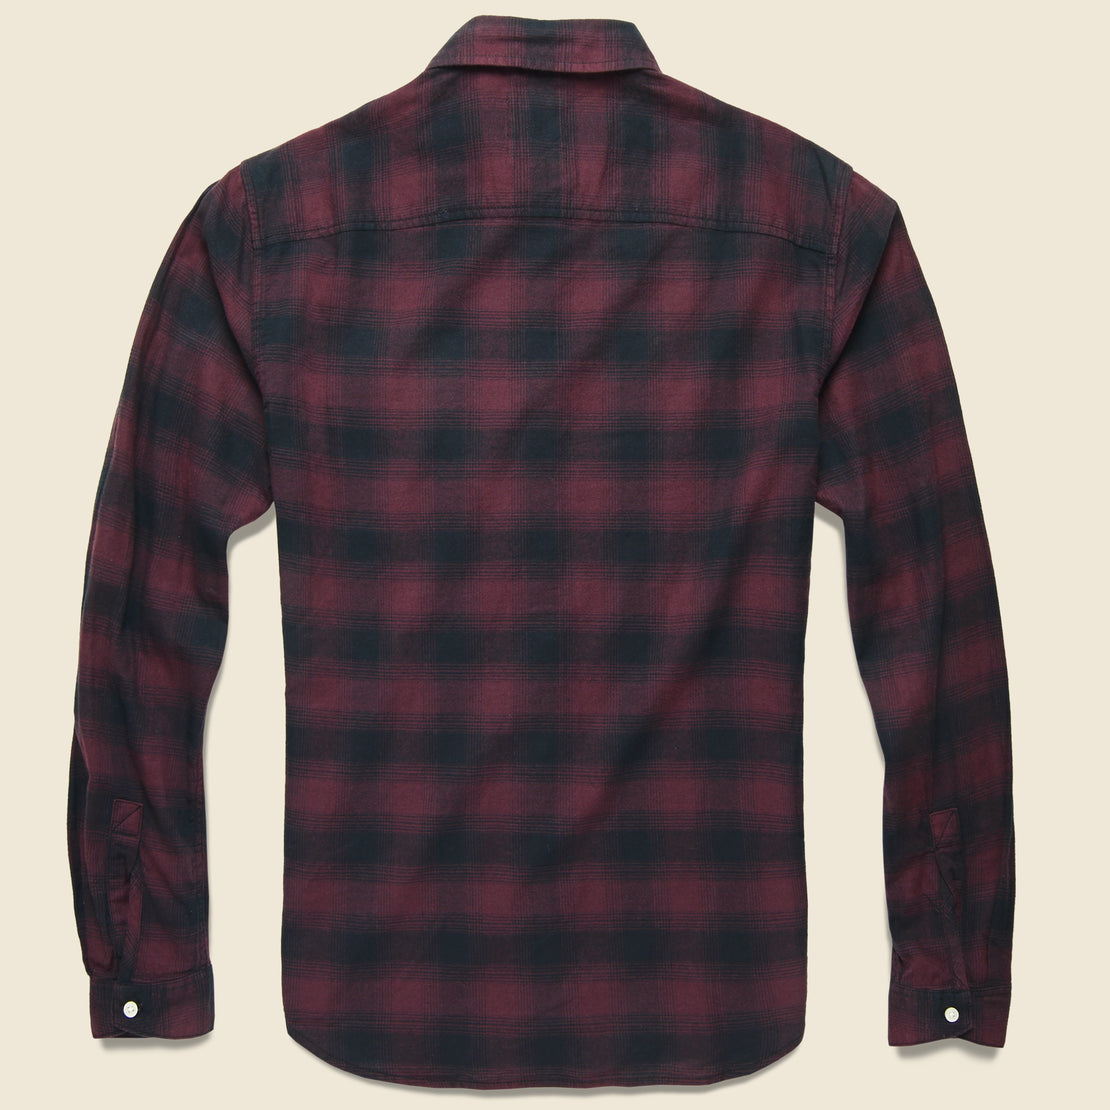 Lumberjack Flannel - Little Burgundy - Life After Denim - STAG Provisions - Tops - L/S Woven - Plaid